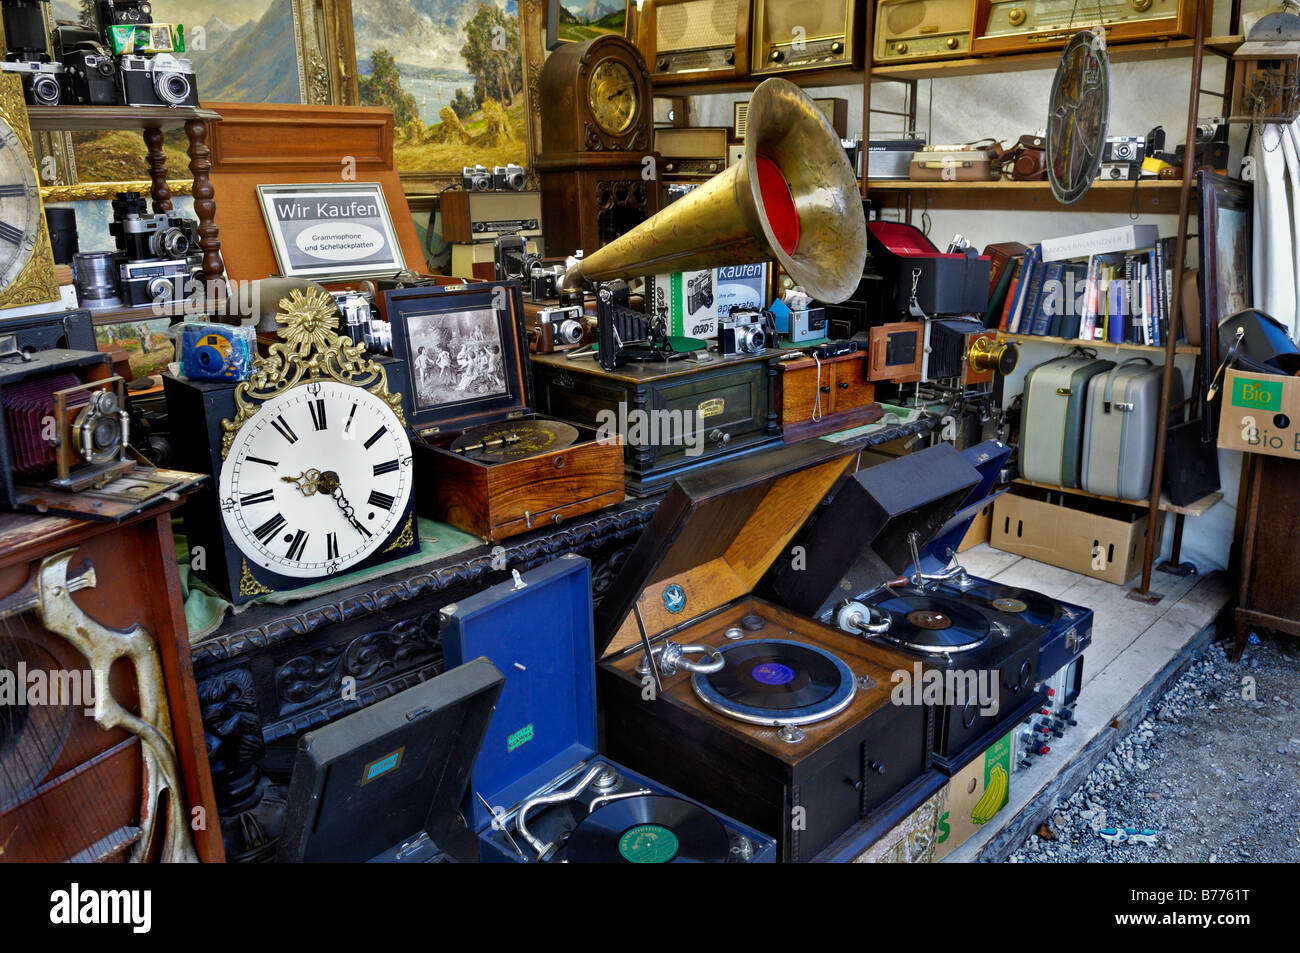 Gramophone, radios, cameras, stall on the Auer Dult market, Munich, Bavaria, Germany, Europe Stock Photo